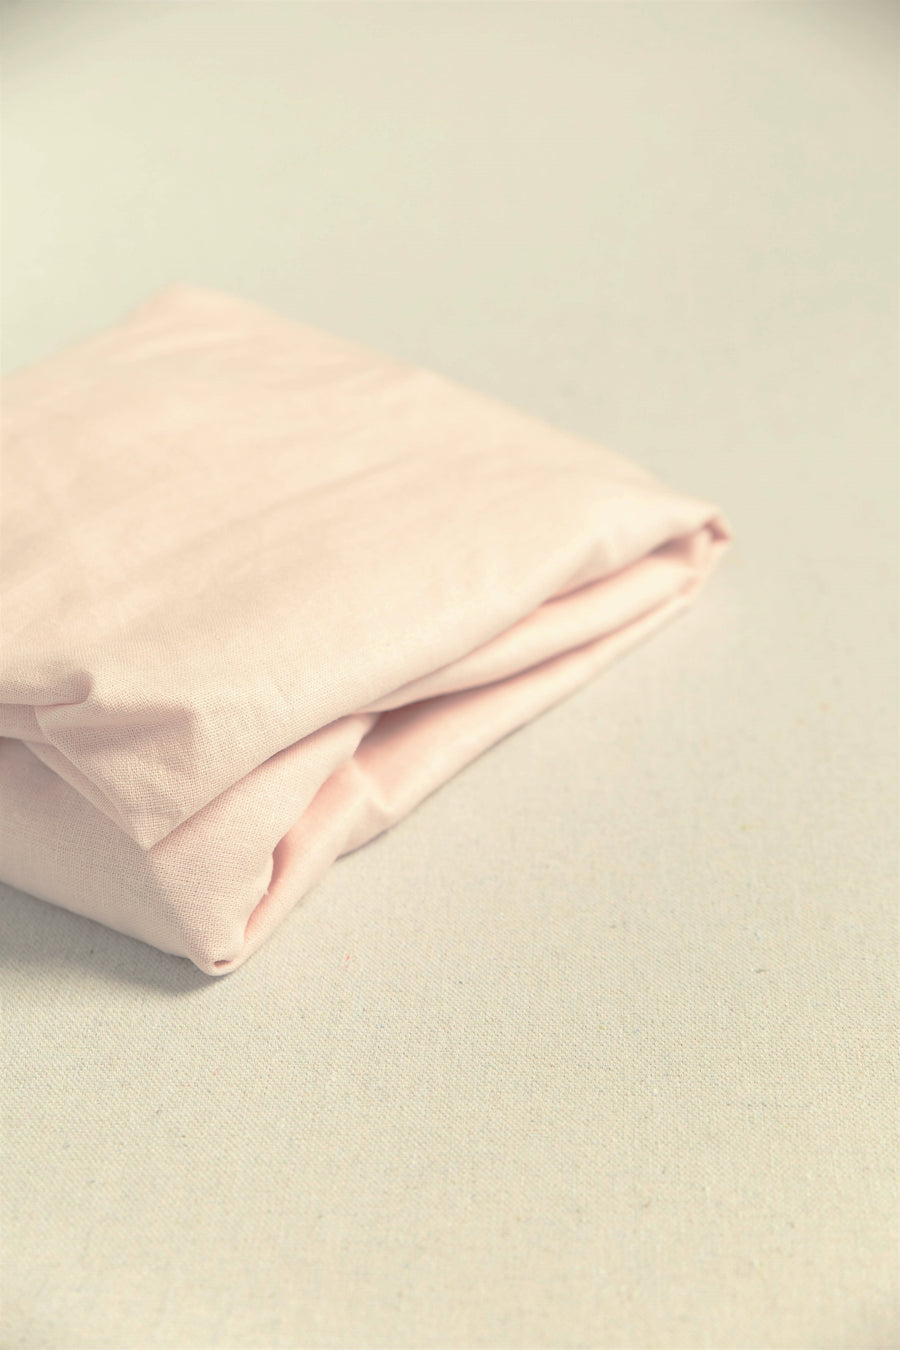 Top Sheets, Conventional & Adjustable Beds, Organic 100% Cotton